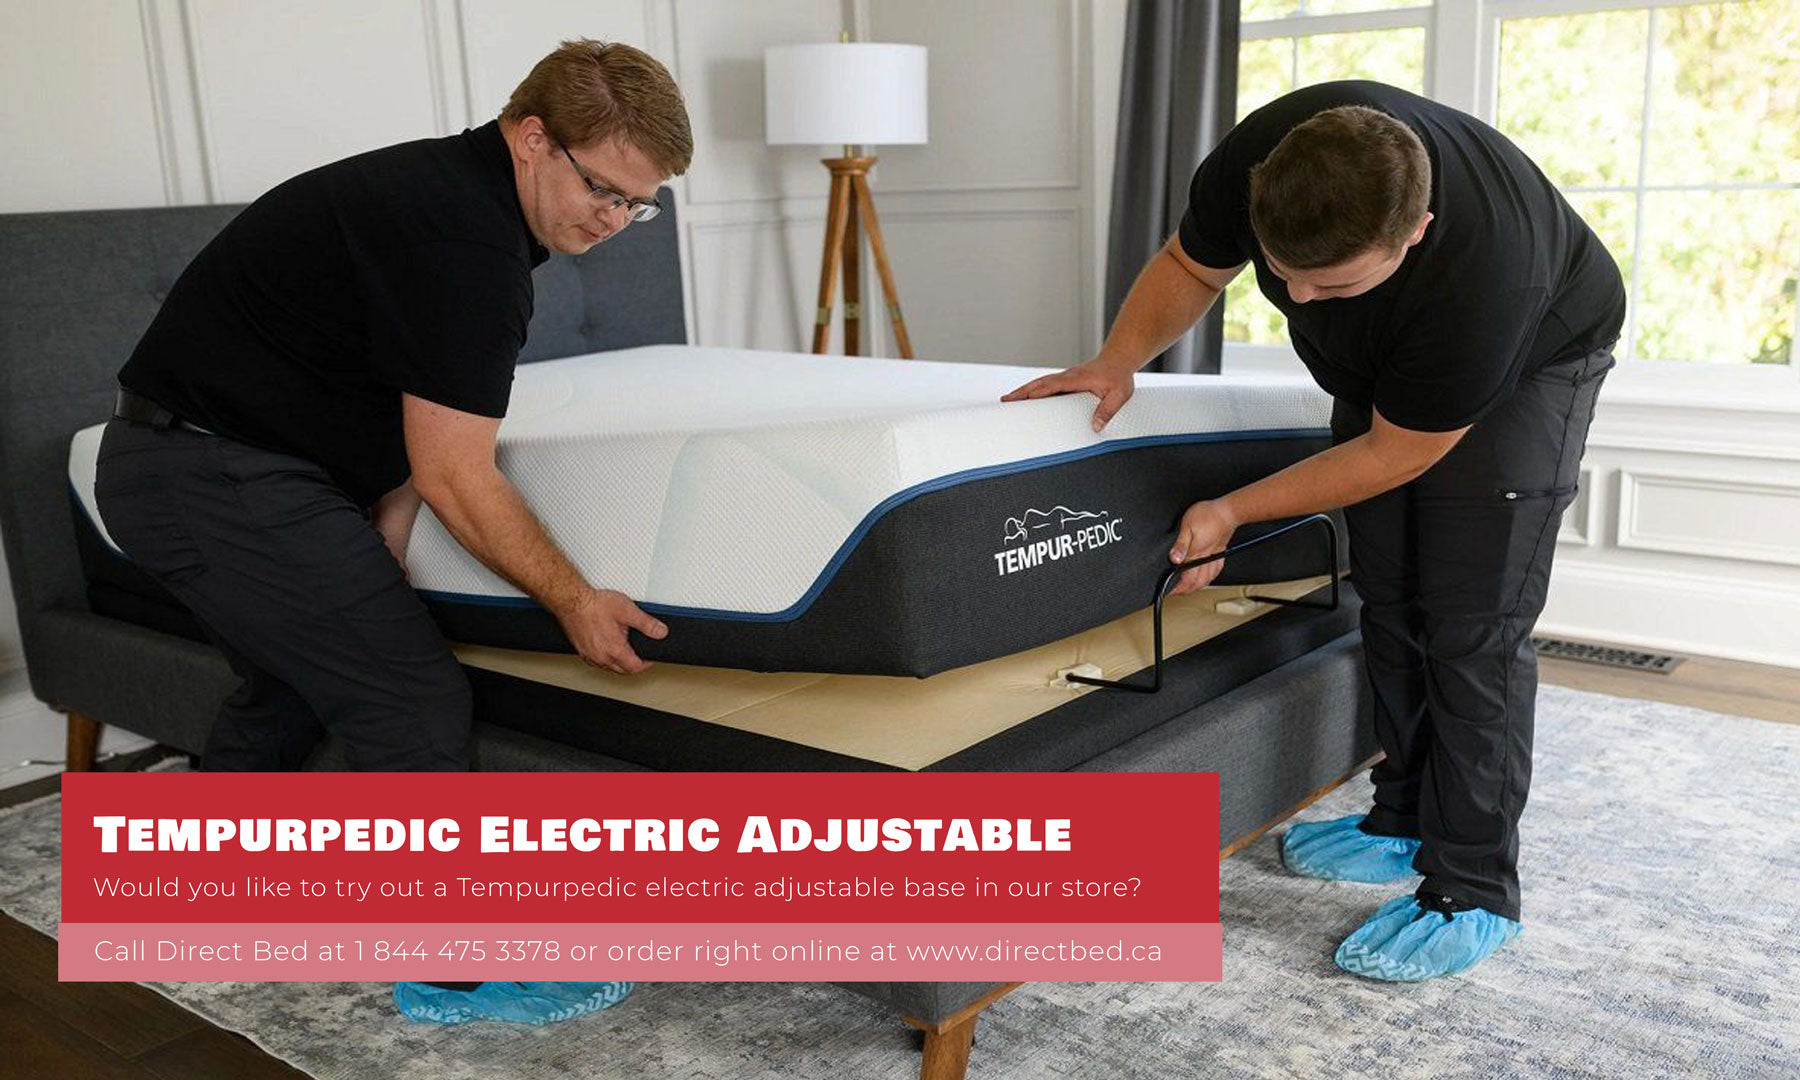 Would you like to try out a Tempurpedic electric adjustable base in our store? 